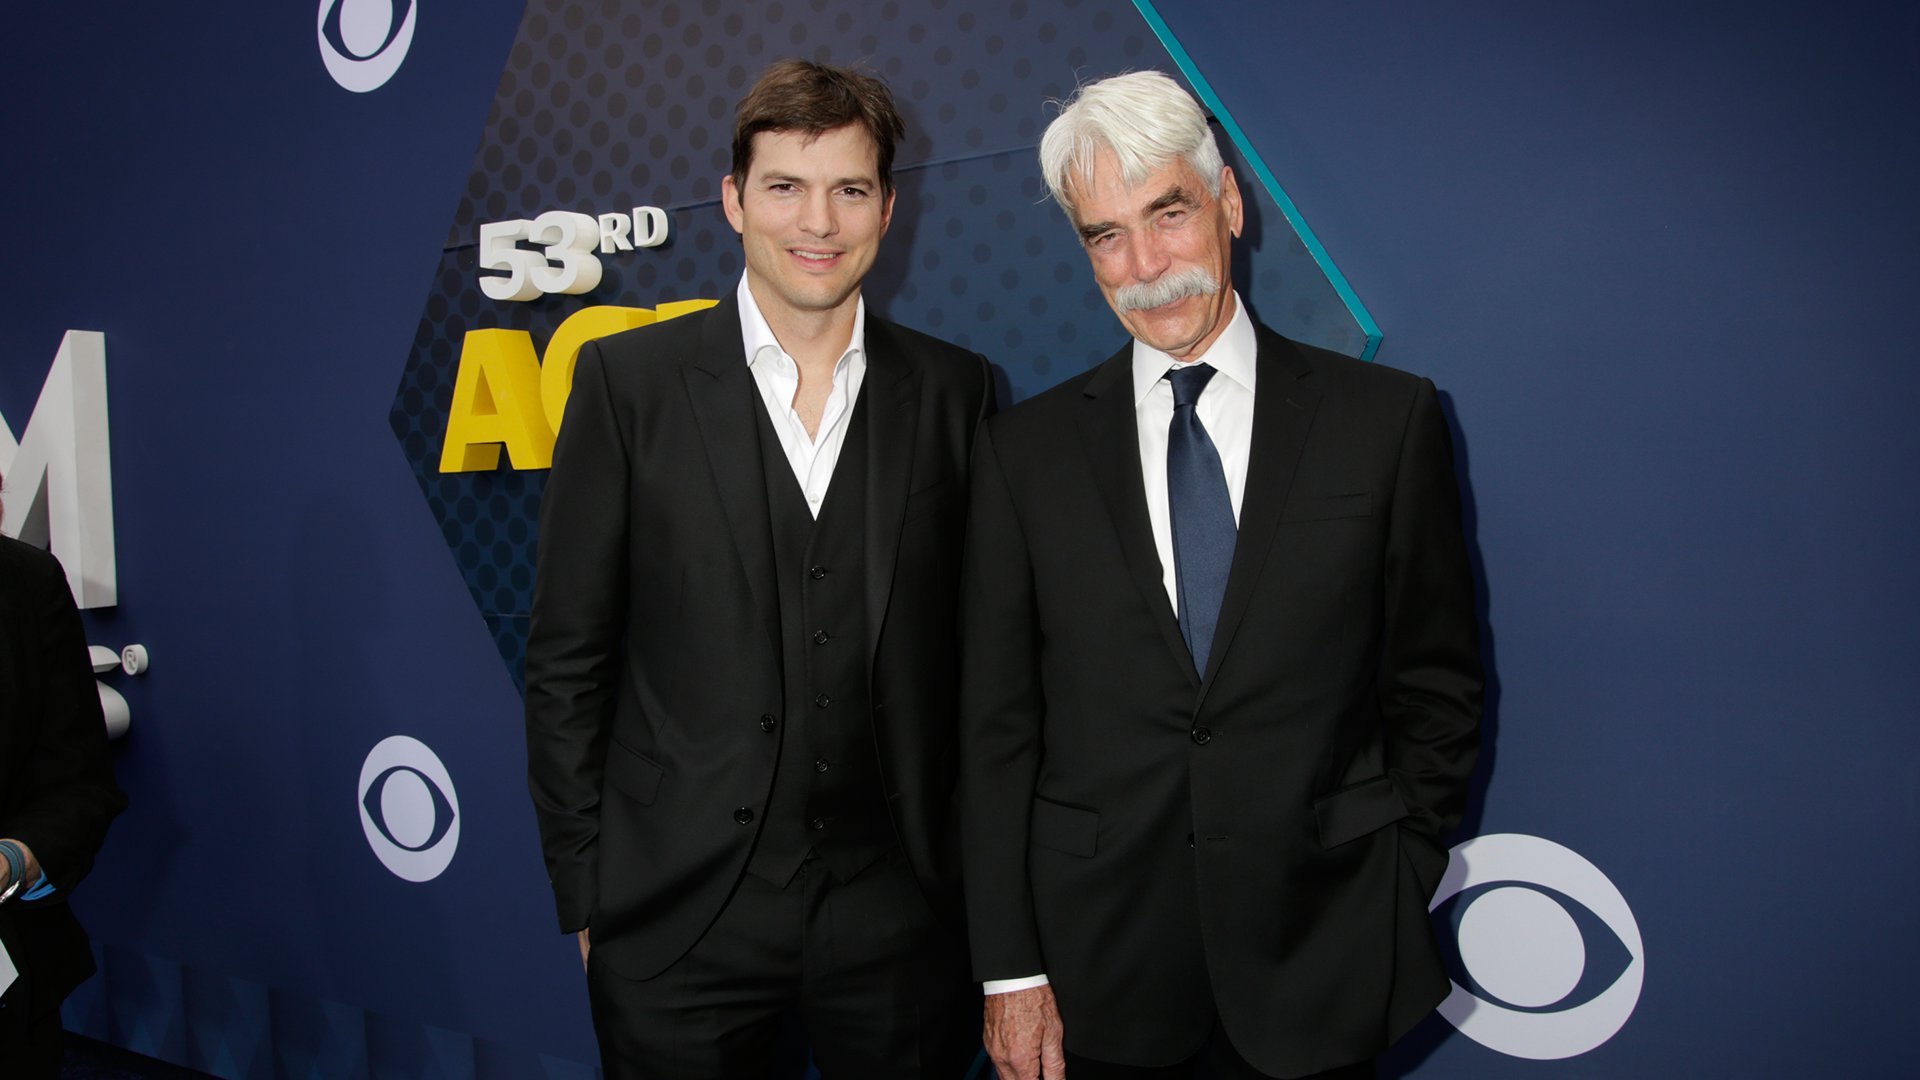 Ashton Kutcher and Sam Elliott, stars of The Ranch, take a break from filming to attend the 53rd ACM Awards.